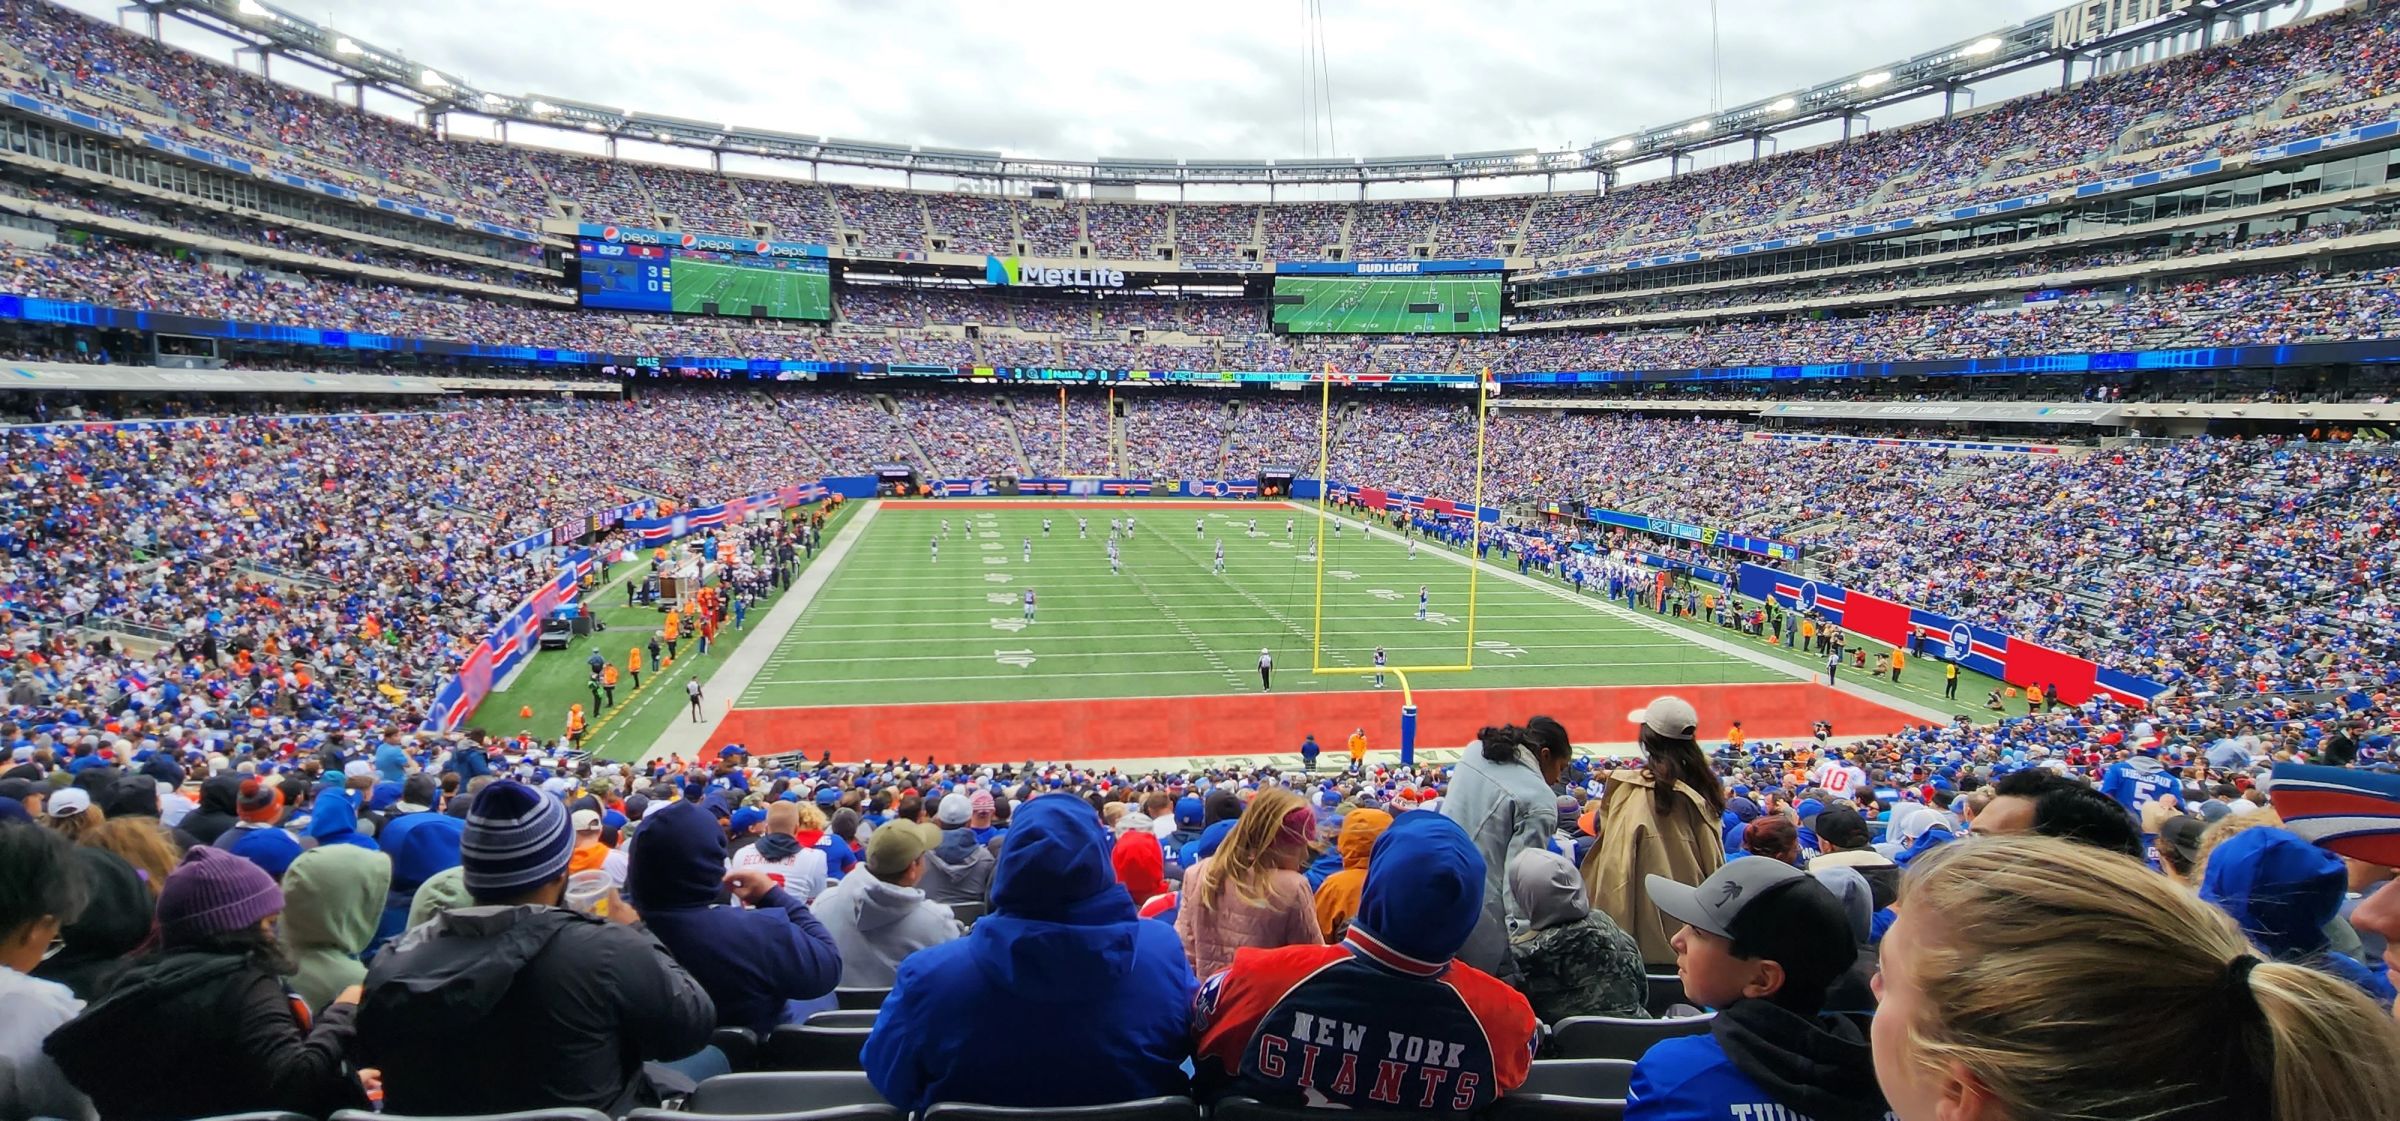 section 128, row 40 seat view  for football - metlife stadium